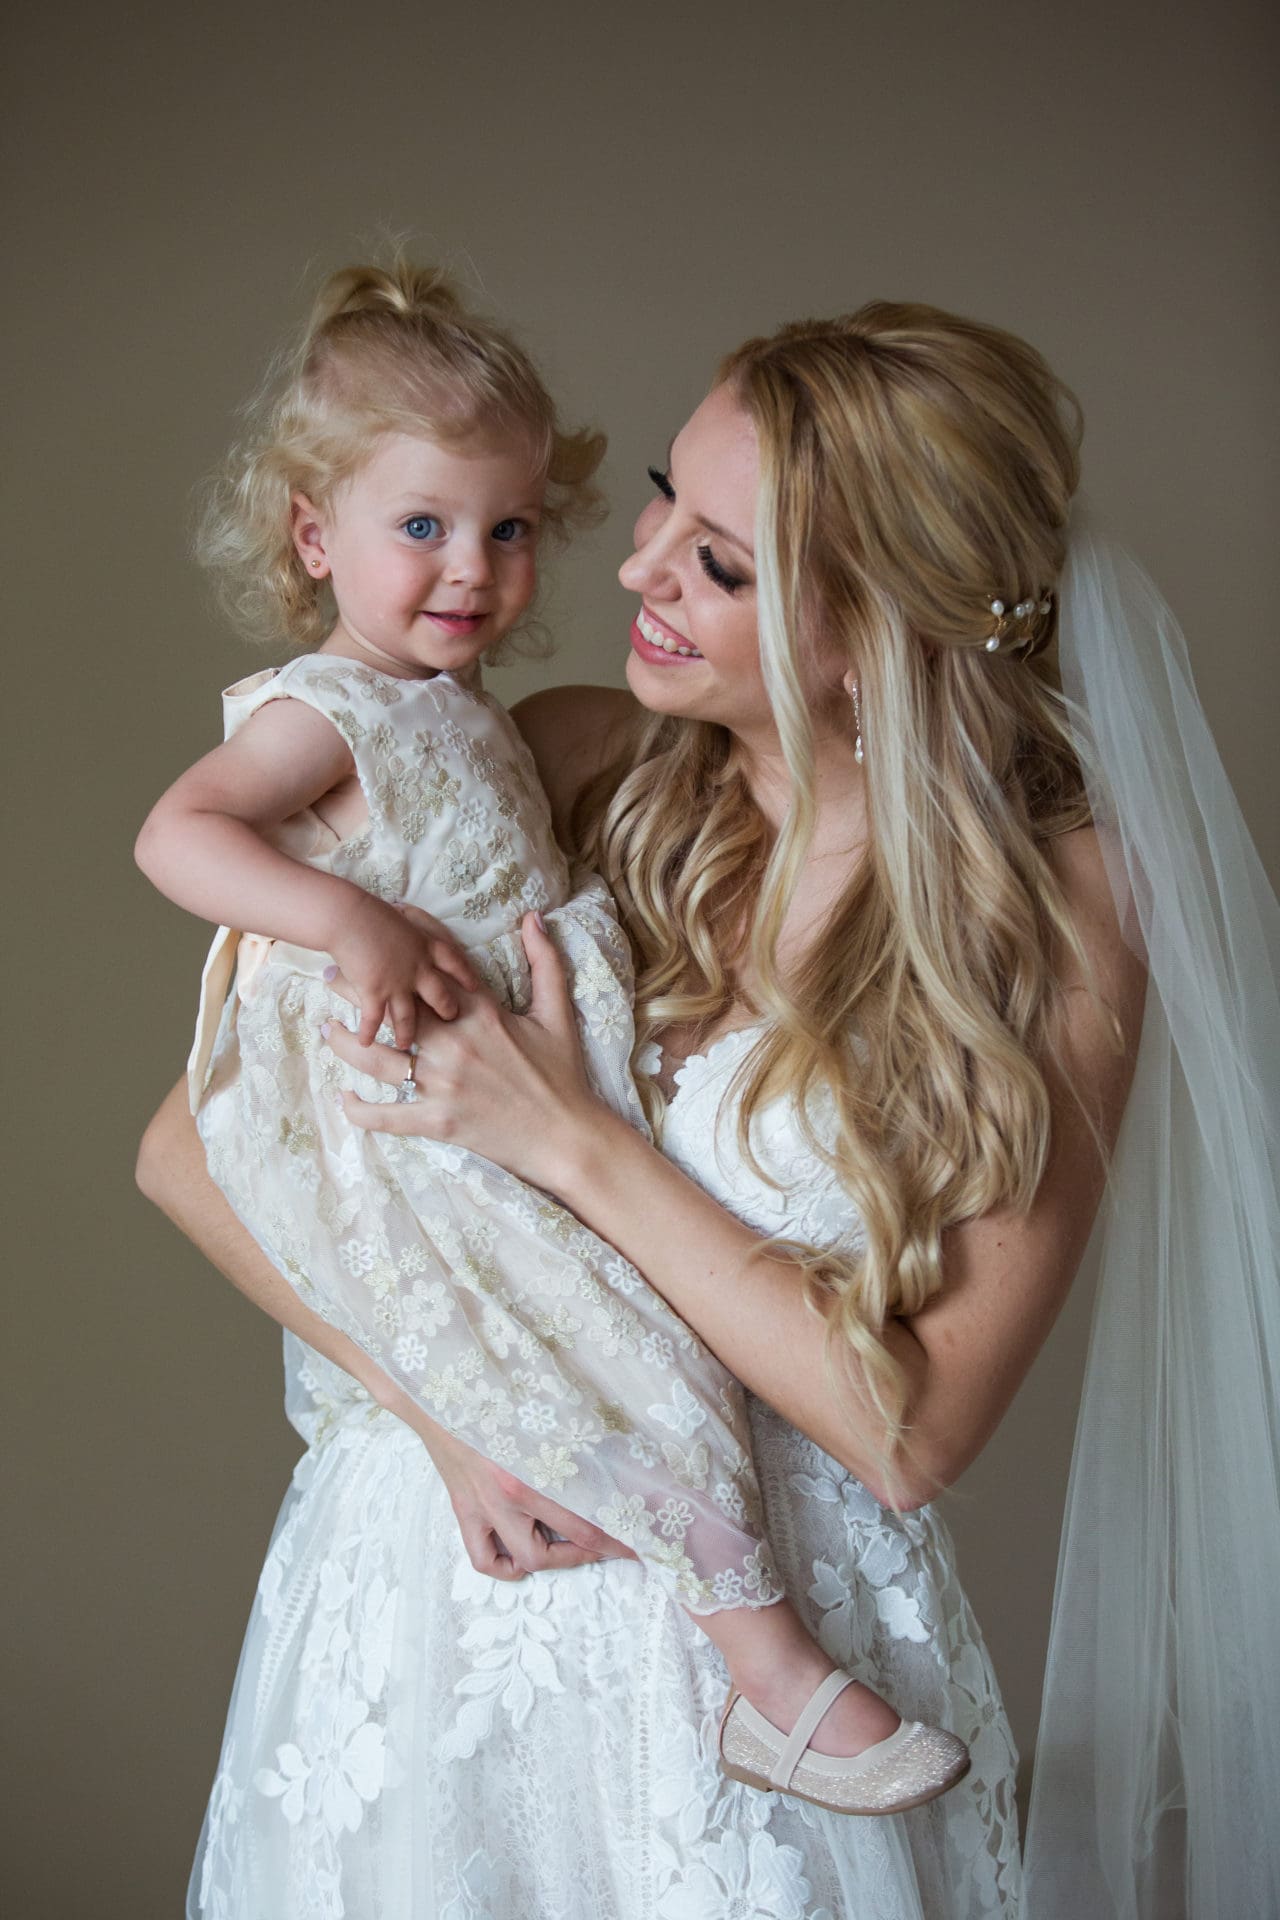 Bride with her daughter during bridal prep at her wedding